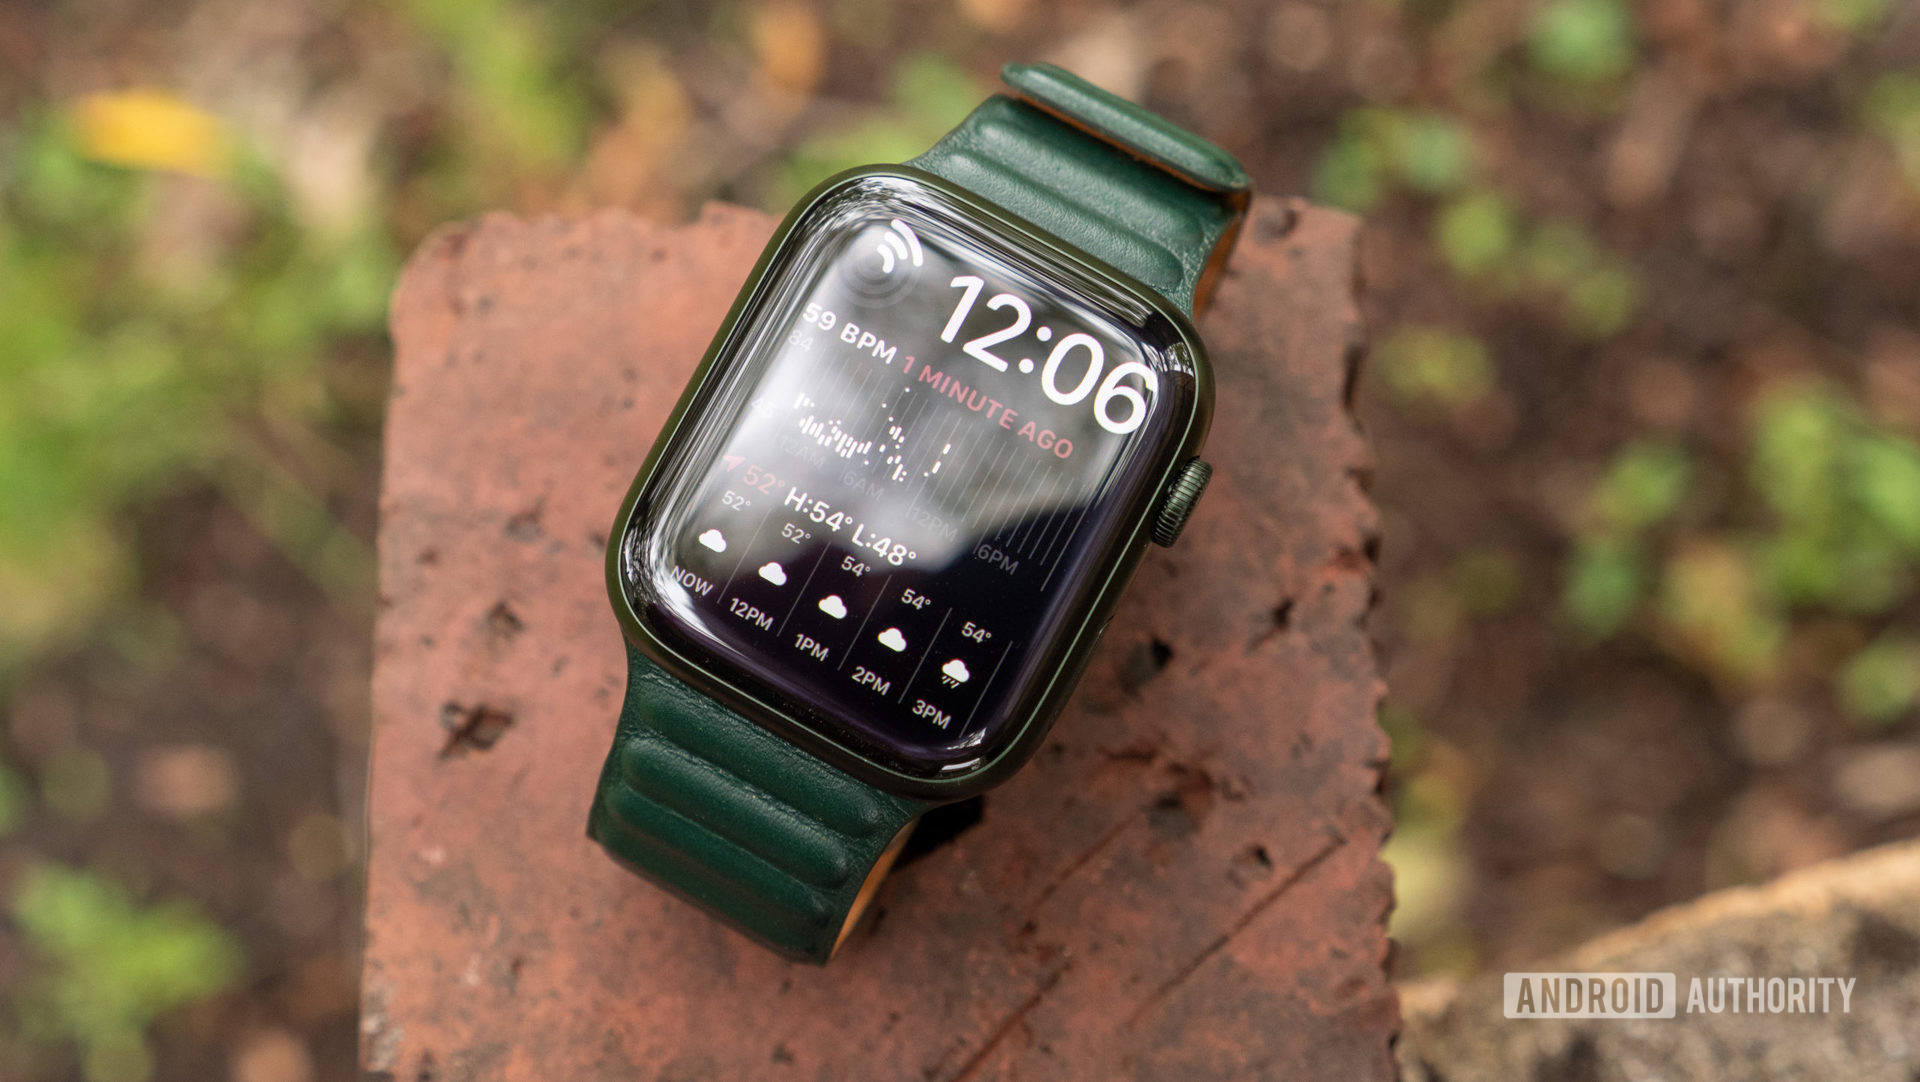 An image of the Apple Watch Series 7 on a brick showing the Modular Duo watch face